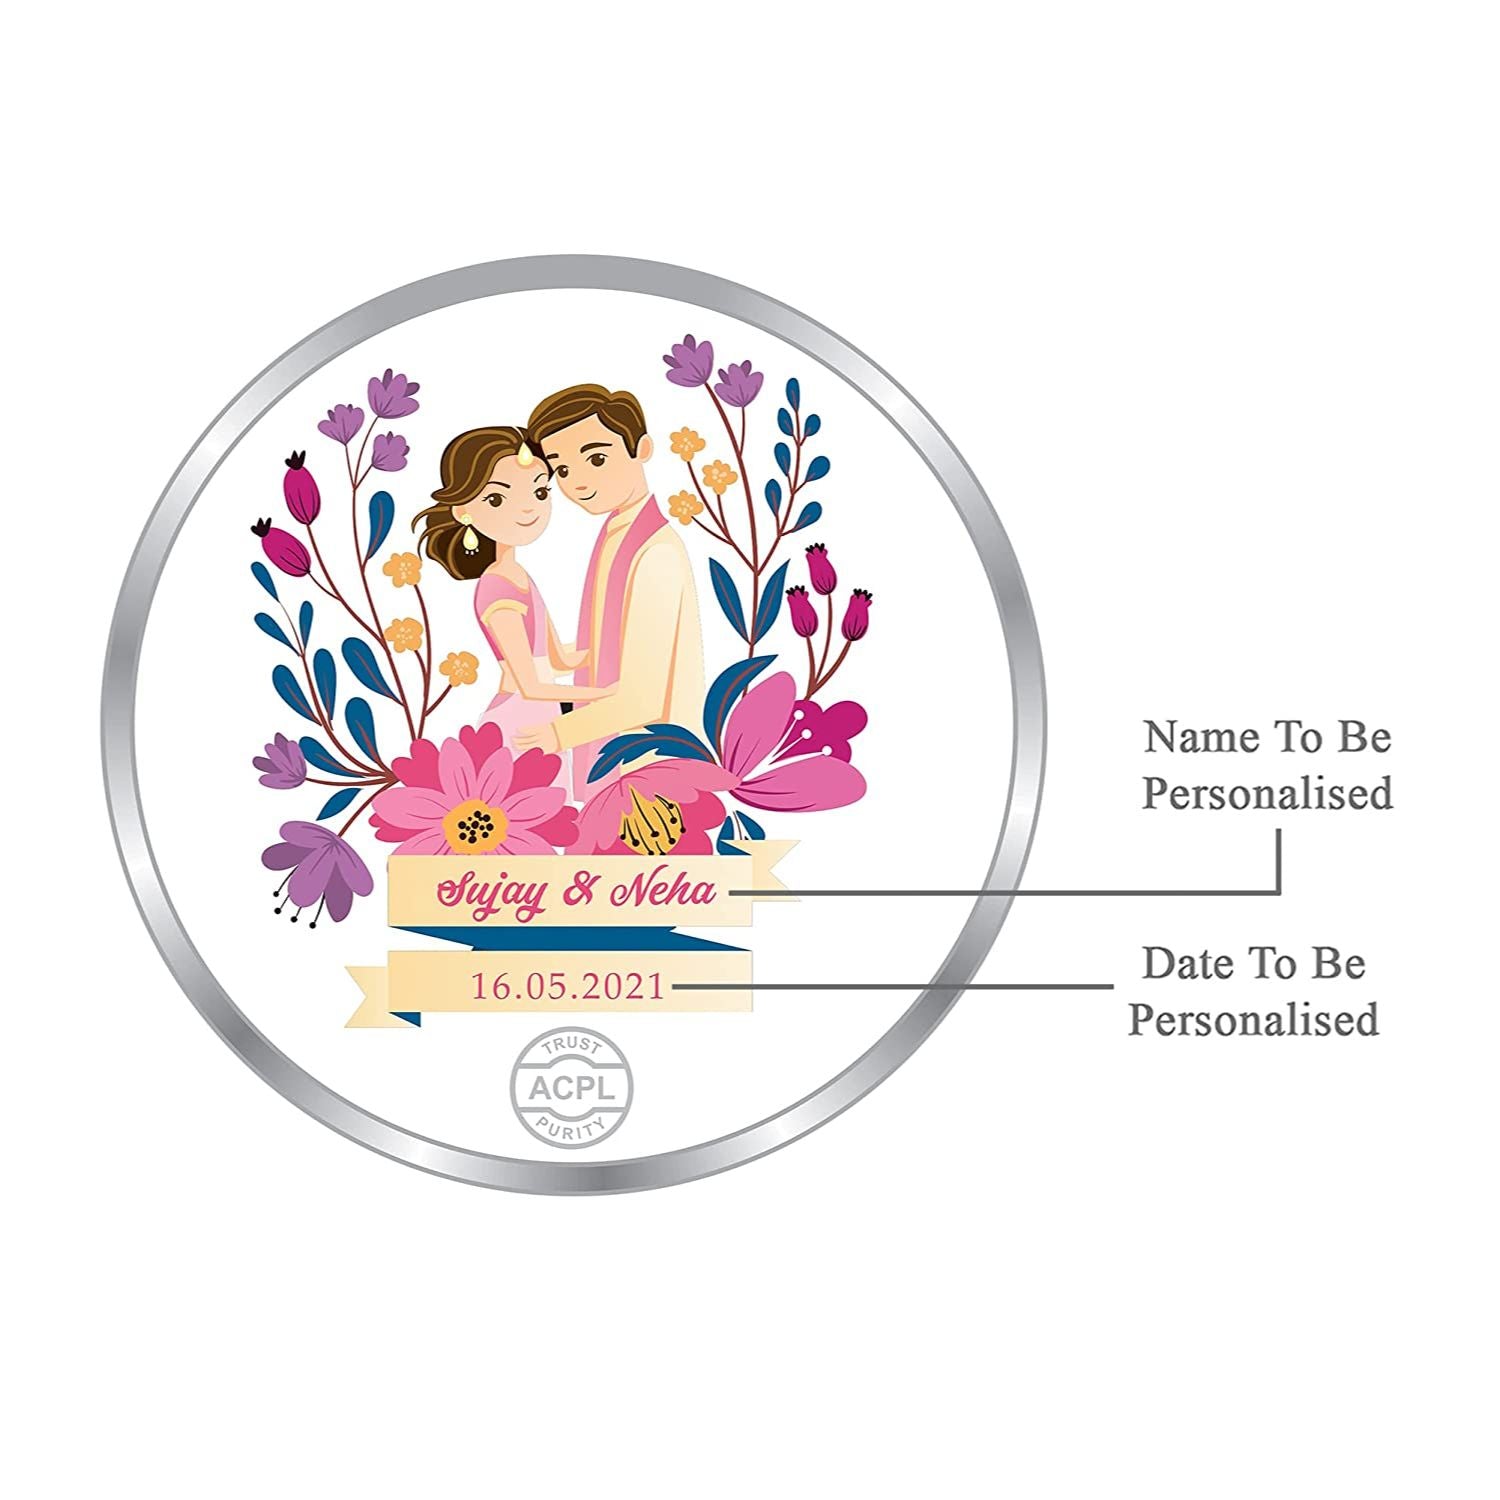 BIS Hallmarked Personalised Silver Coin Mr & Mrs 999 Pure